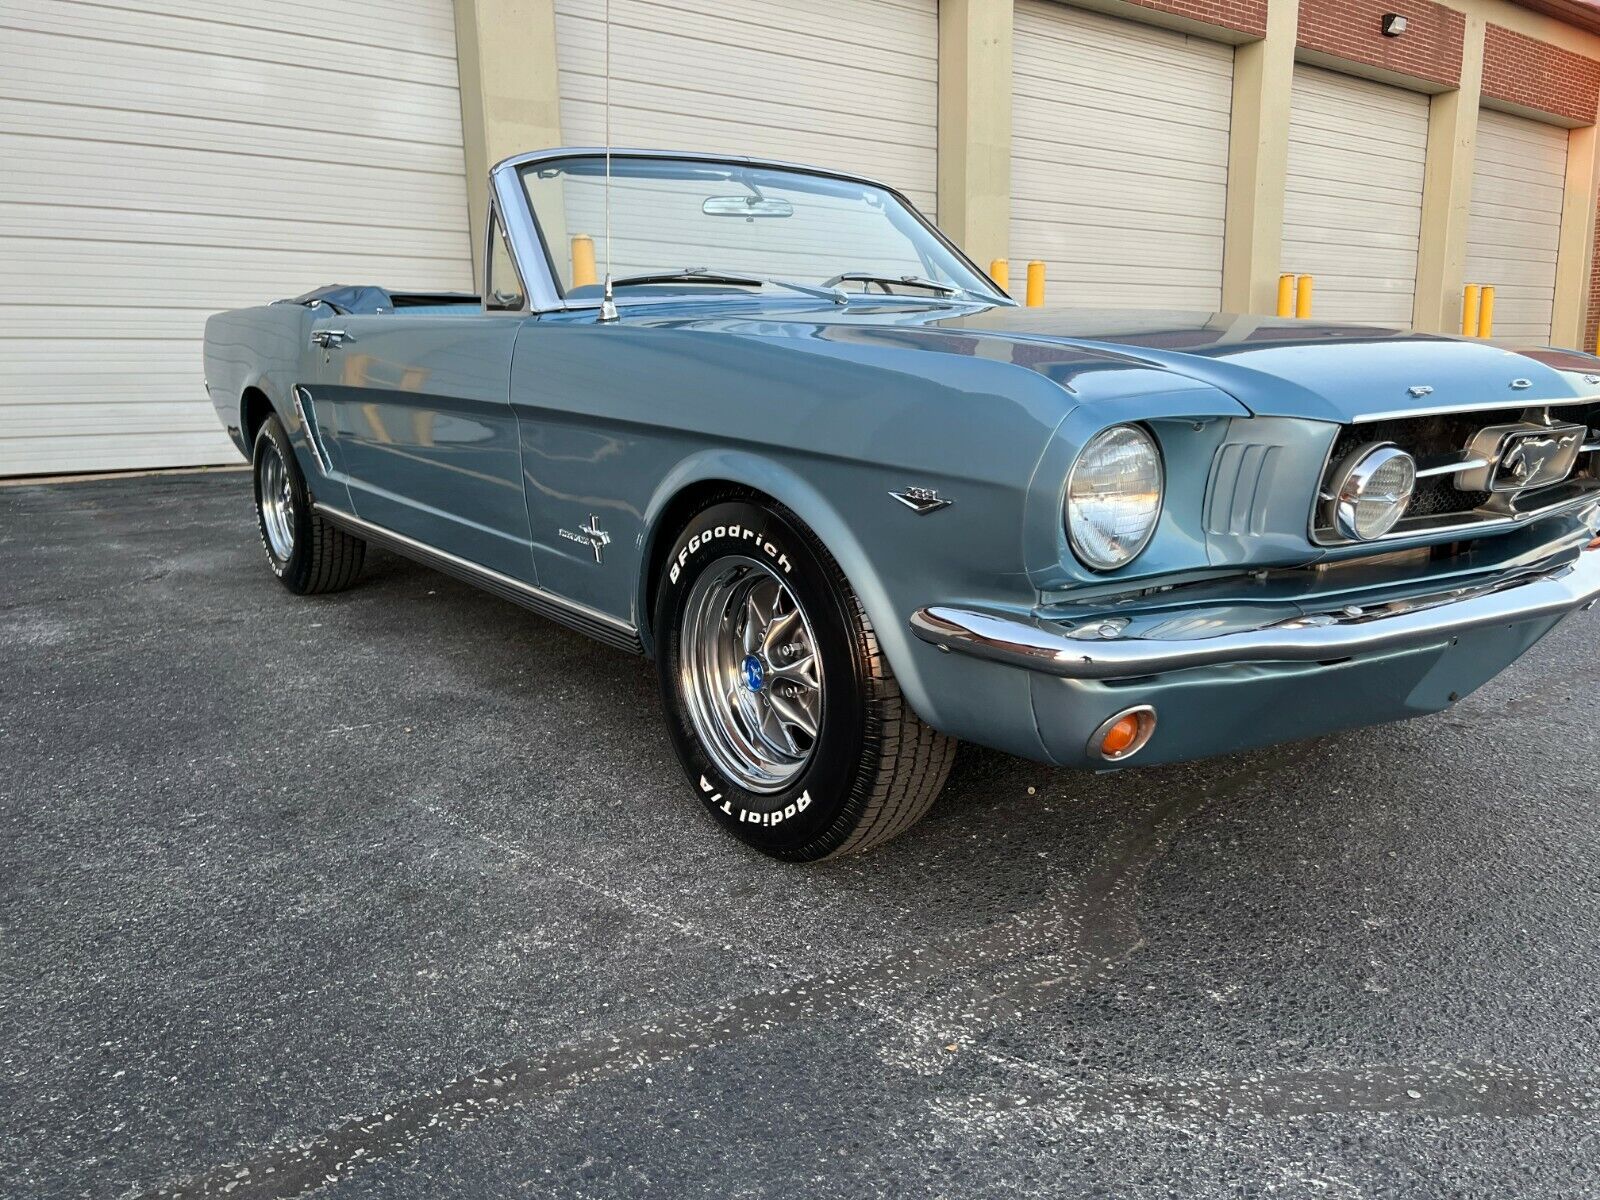 1965 Ford Mustang Convertible factory 289 restored with upgraded power options